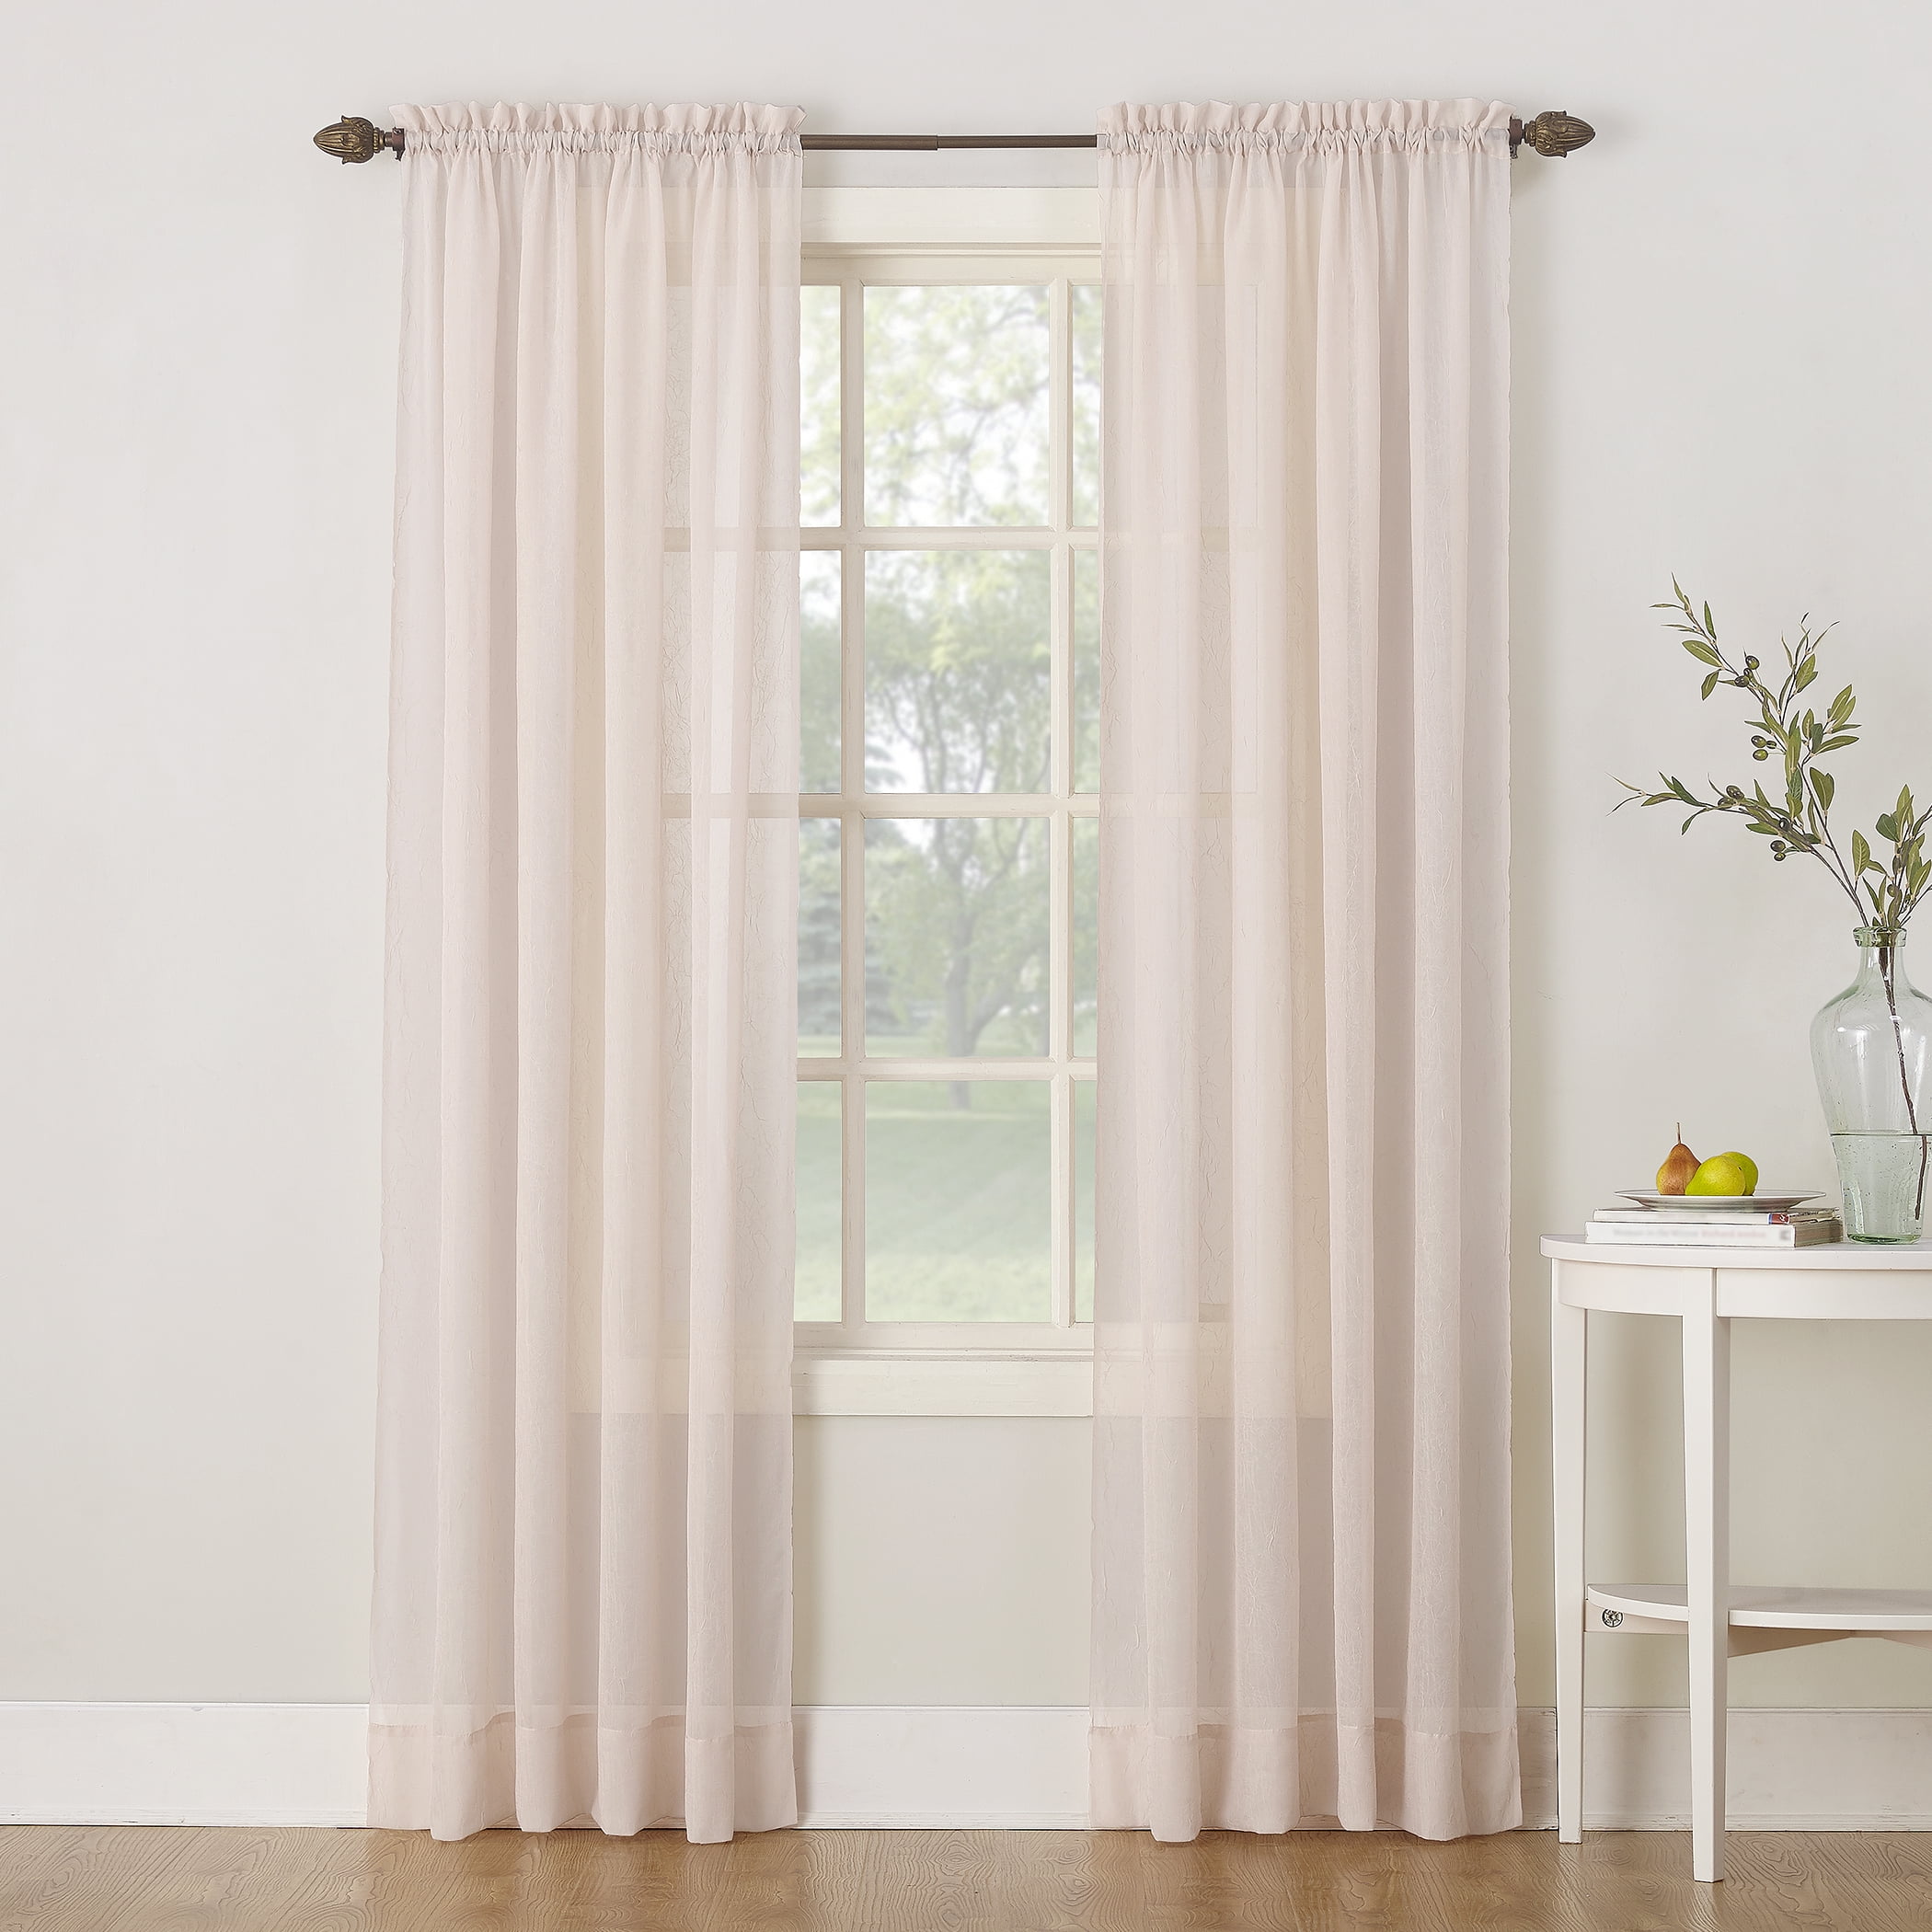 No 918 Tayla Crinkled Sheer Rod Pocket Curtain Panel 50 X 95in White for sale online 